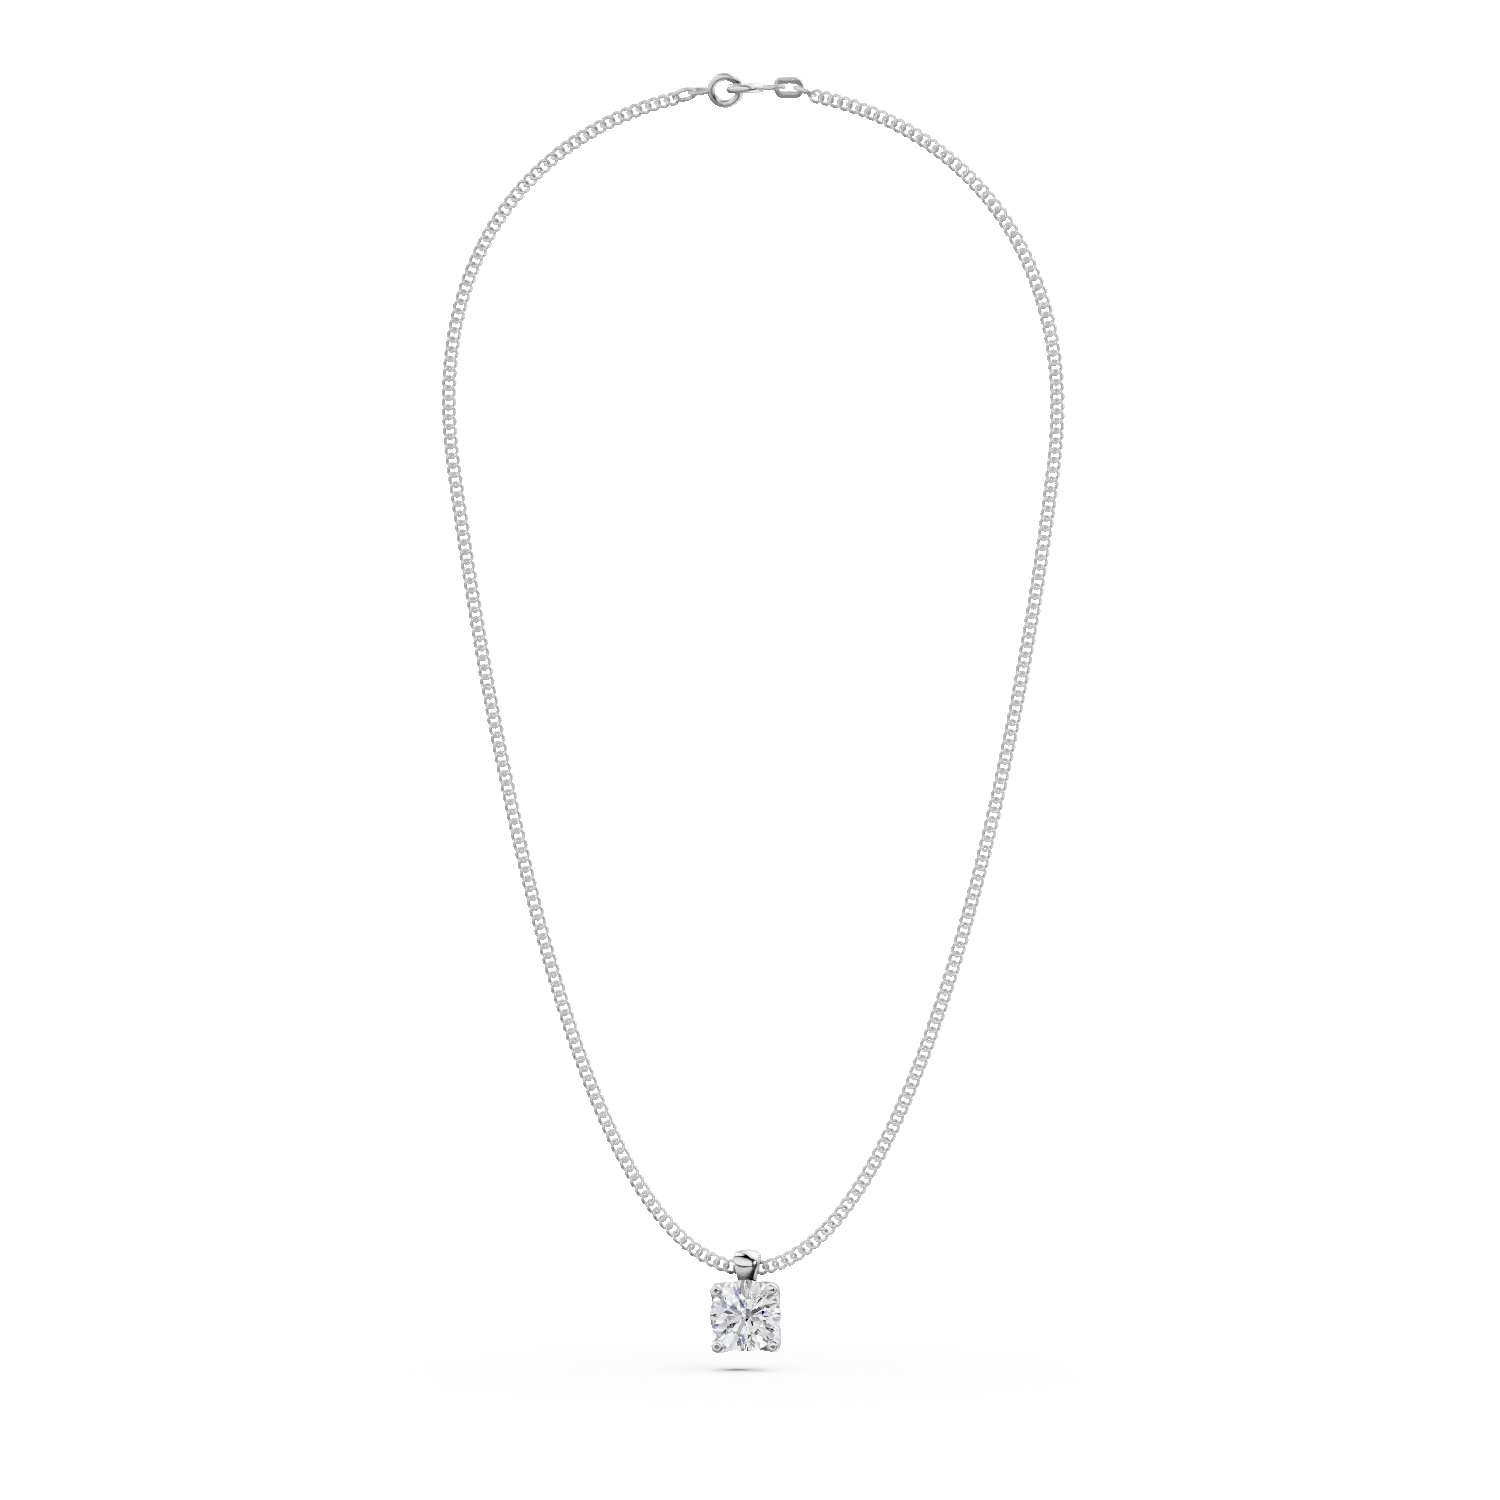 White gold Lotus pendant necklace with 0.25ct solitaire lab grown diamond